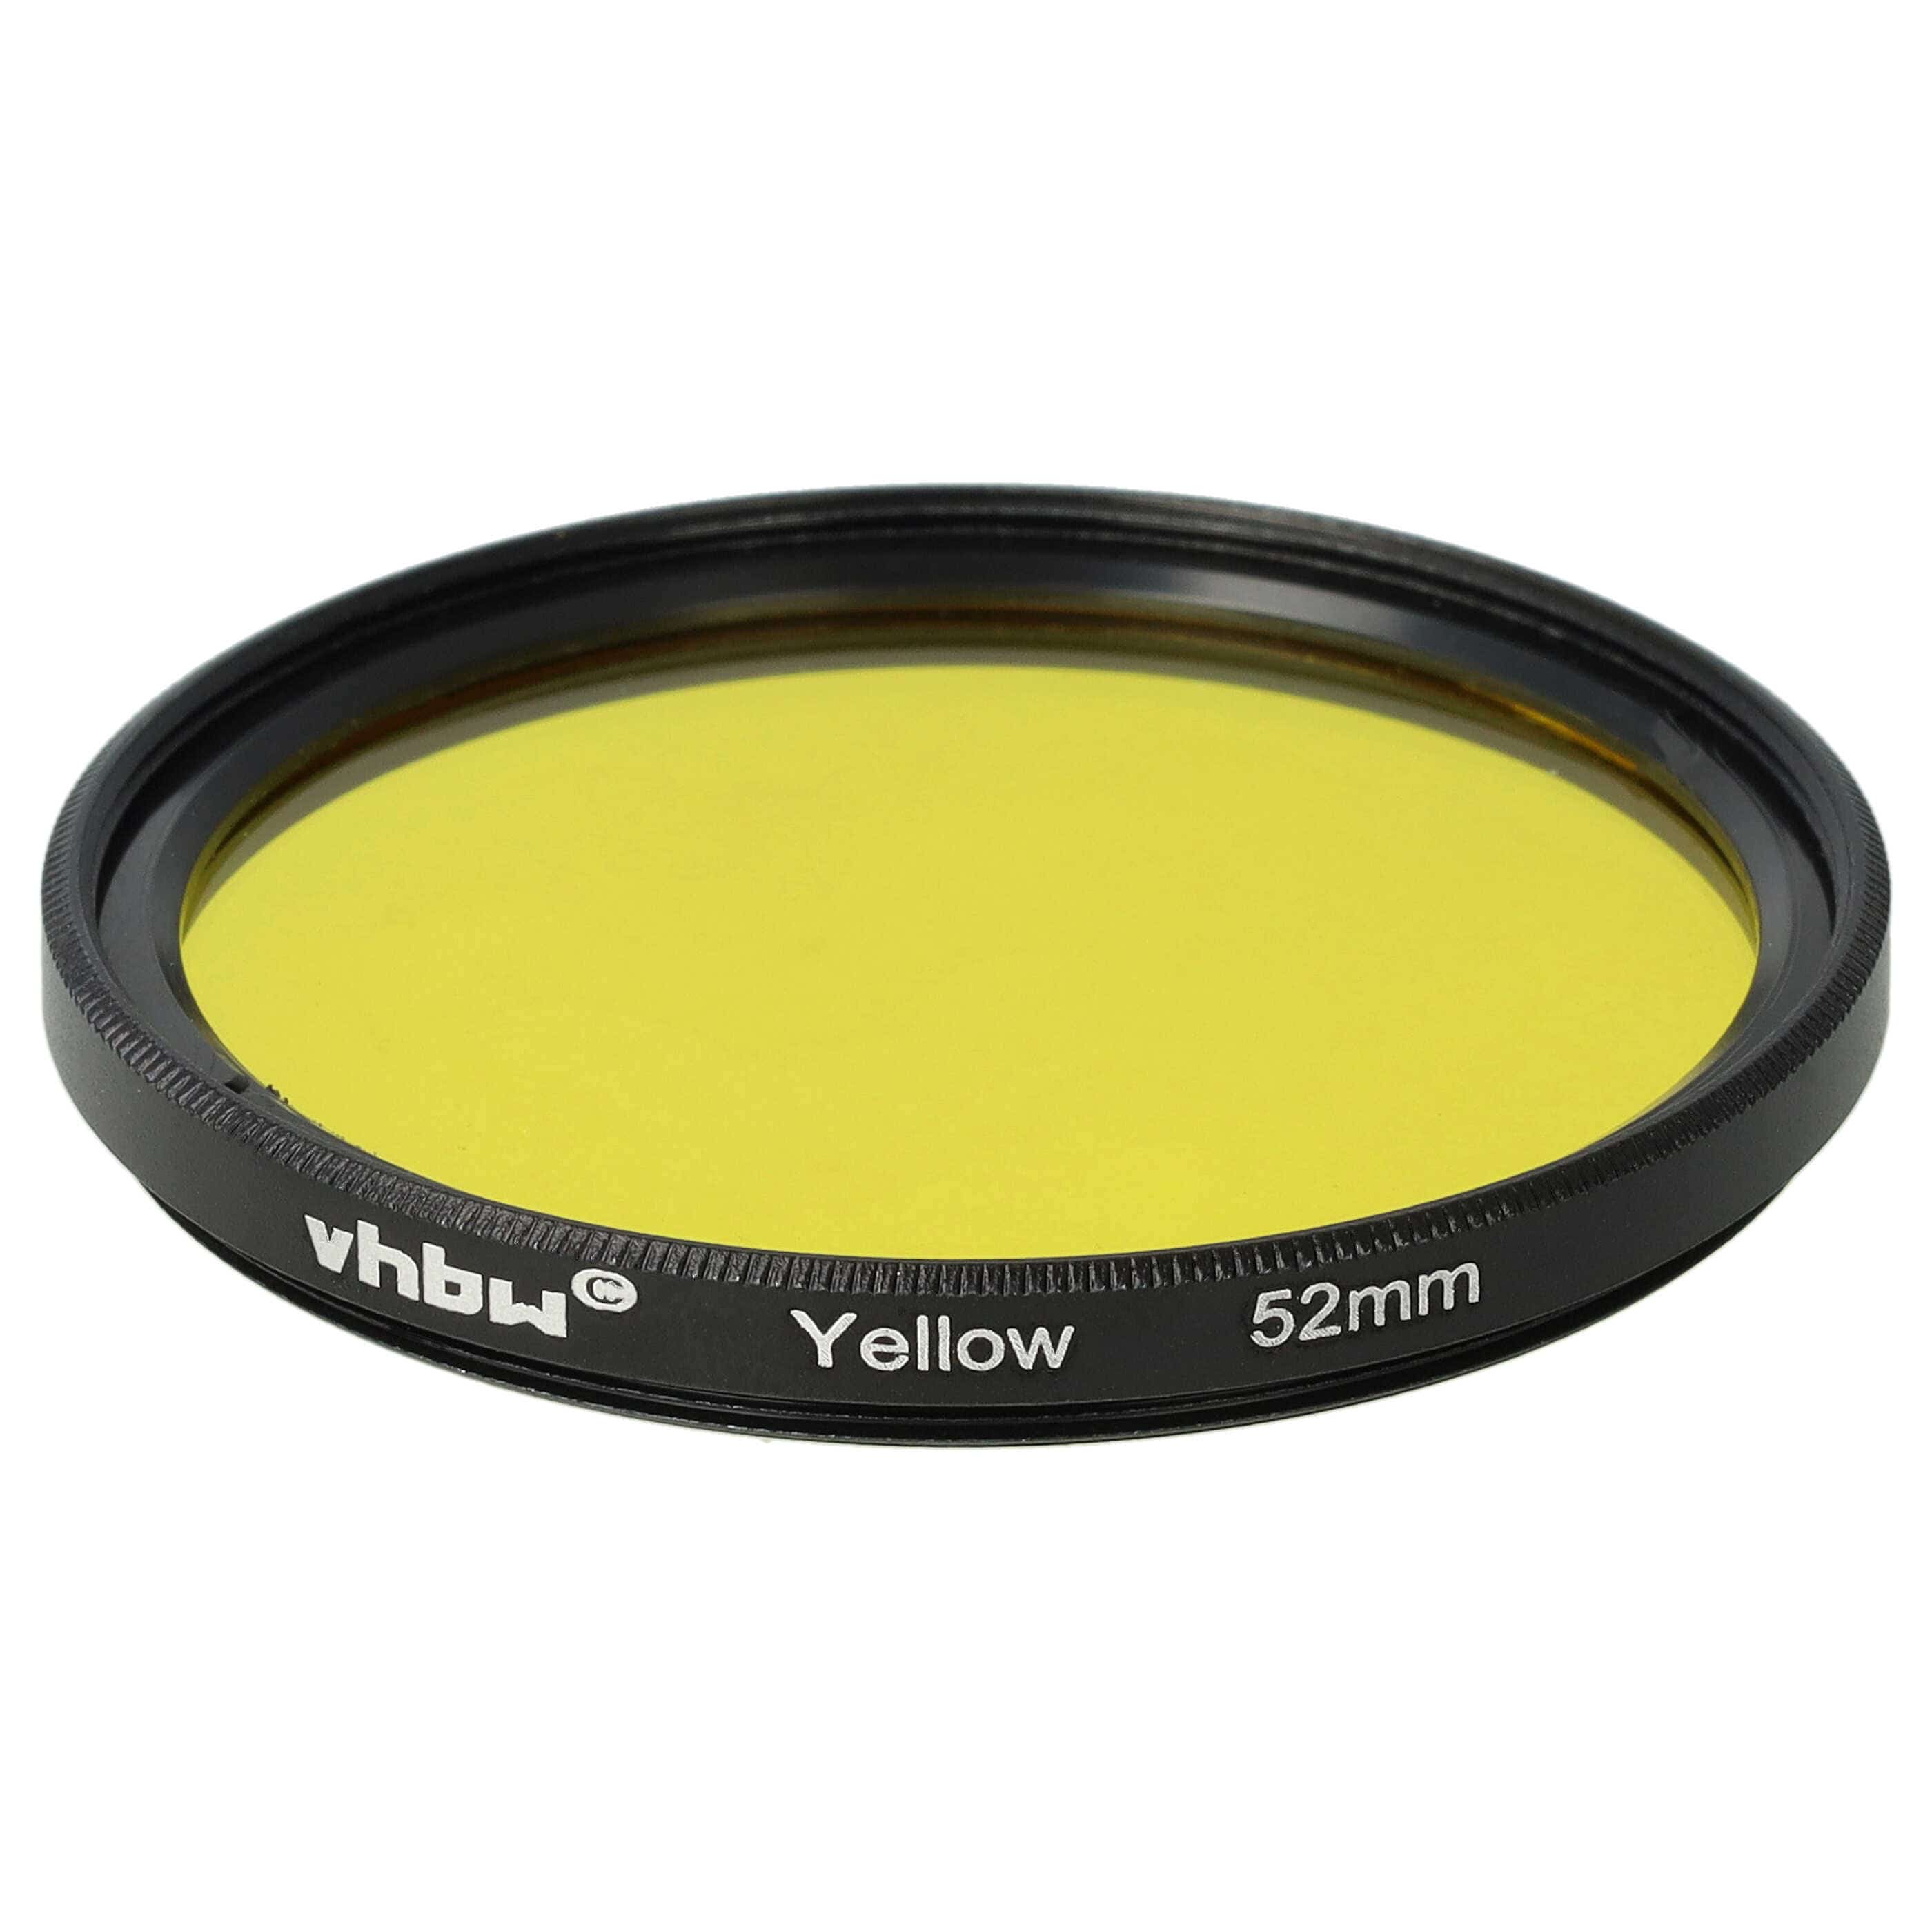 Coloured Filter, Yellow suitable for Camera Lenses with 52 mm Filter Thread - Yellow Filter